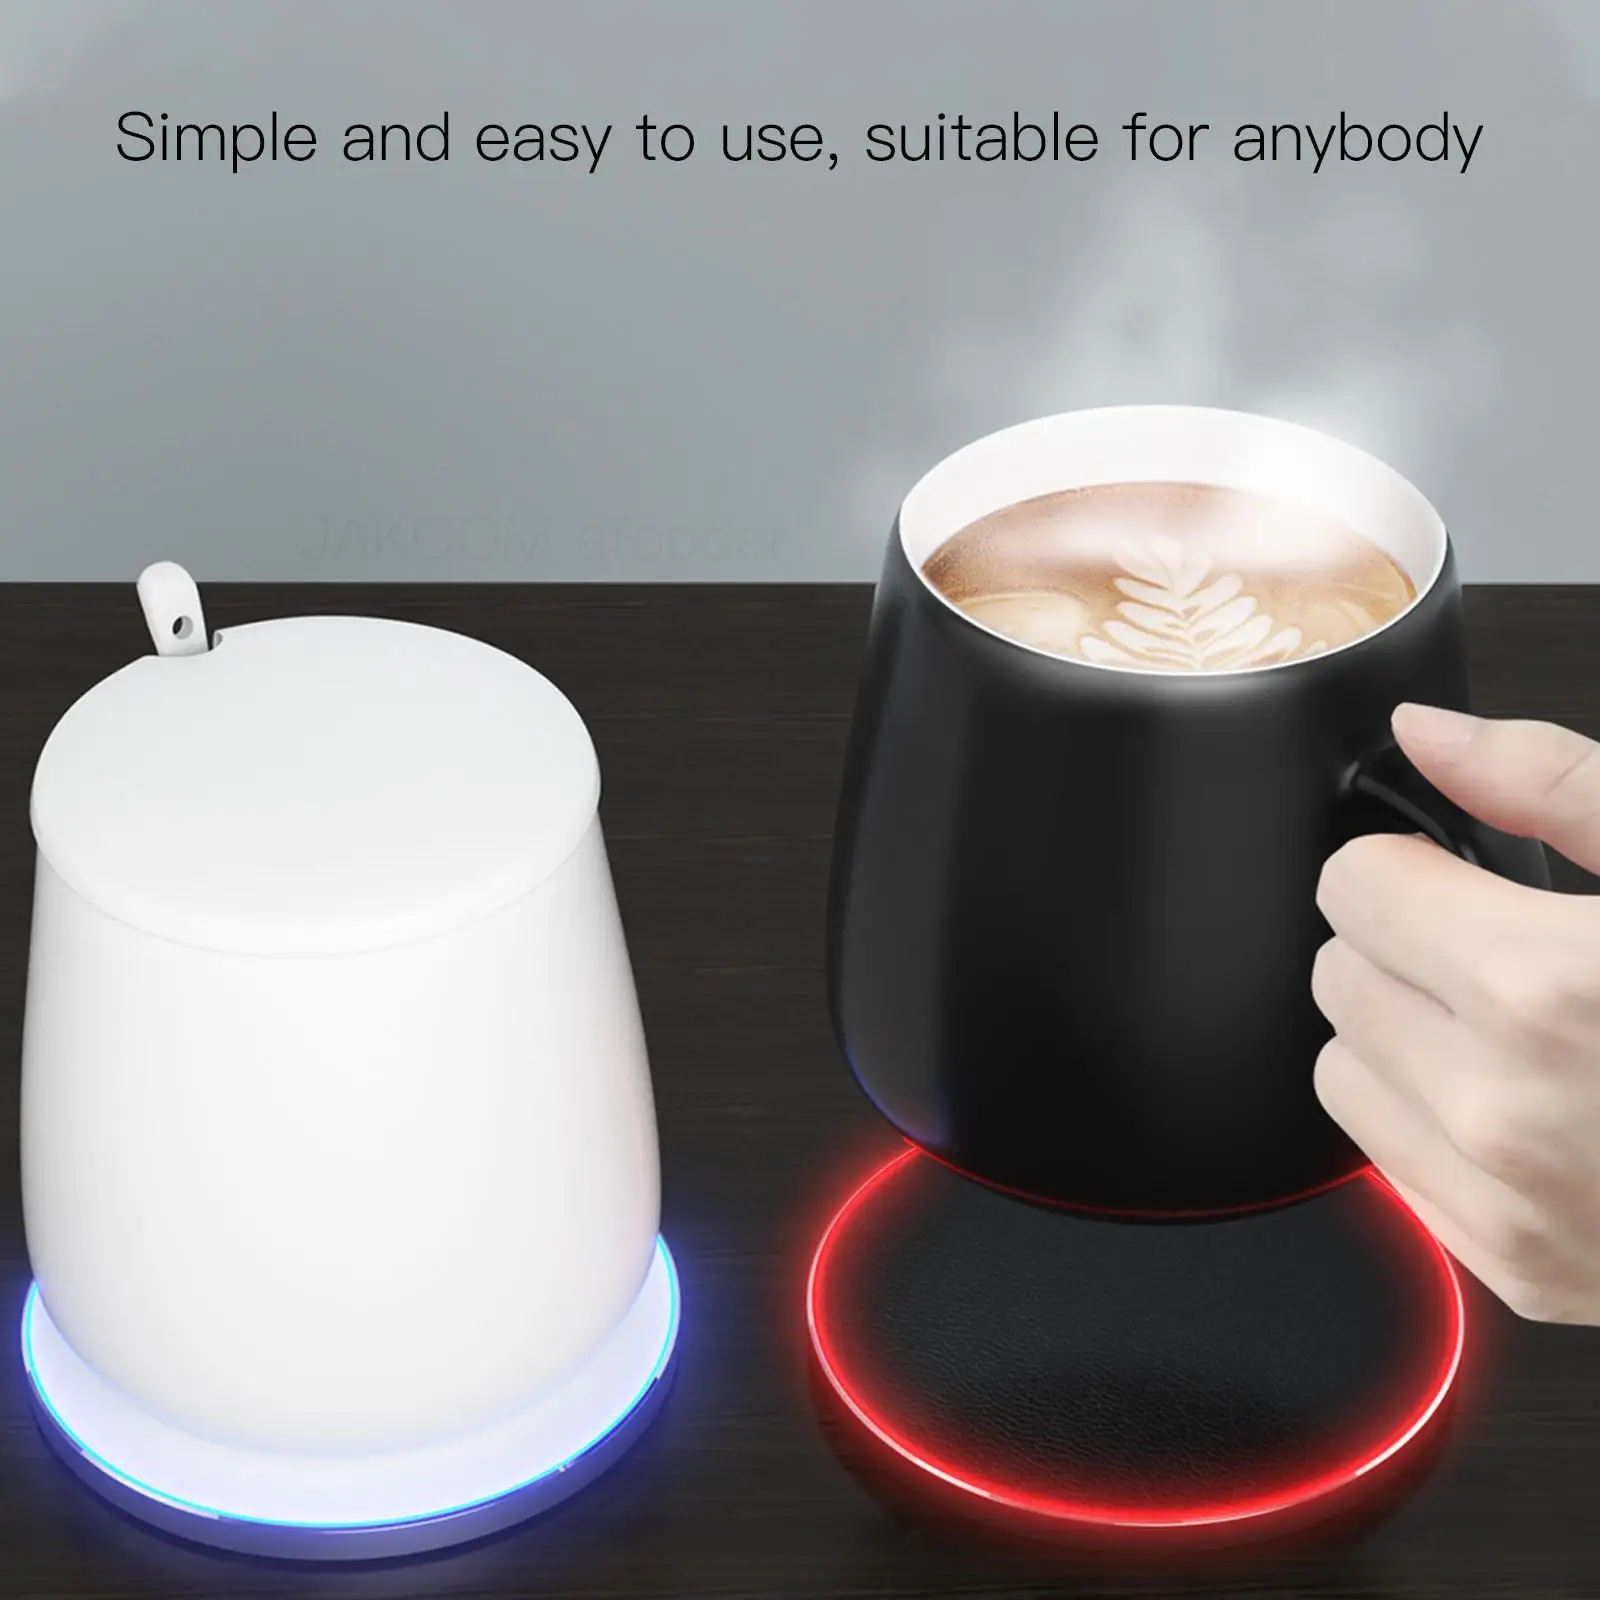 D8 Smart Coffee Mug Warmer self-Heated Cup Thermostatic Cup for